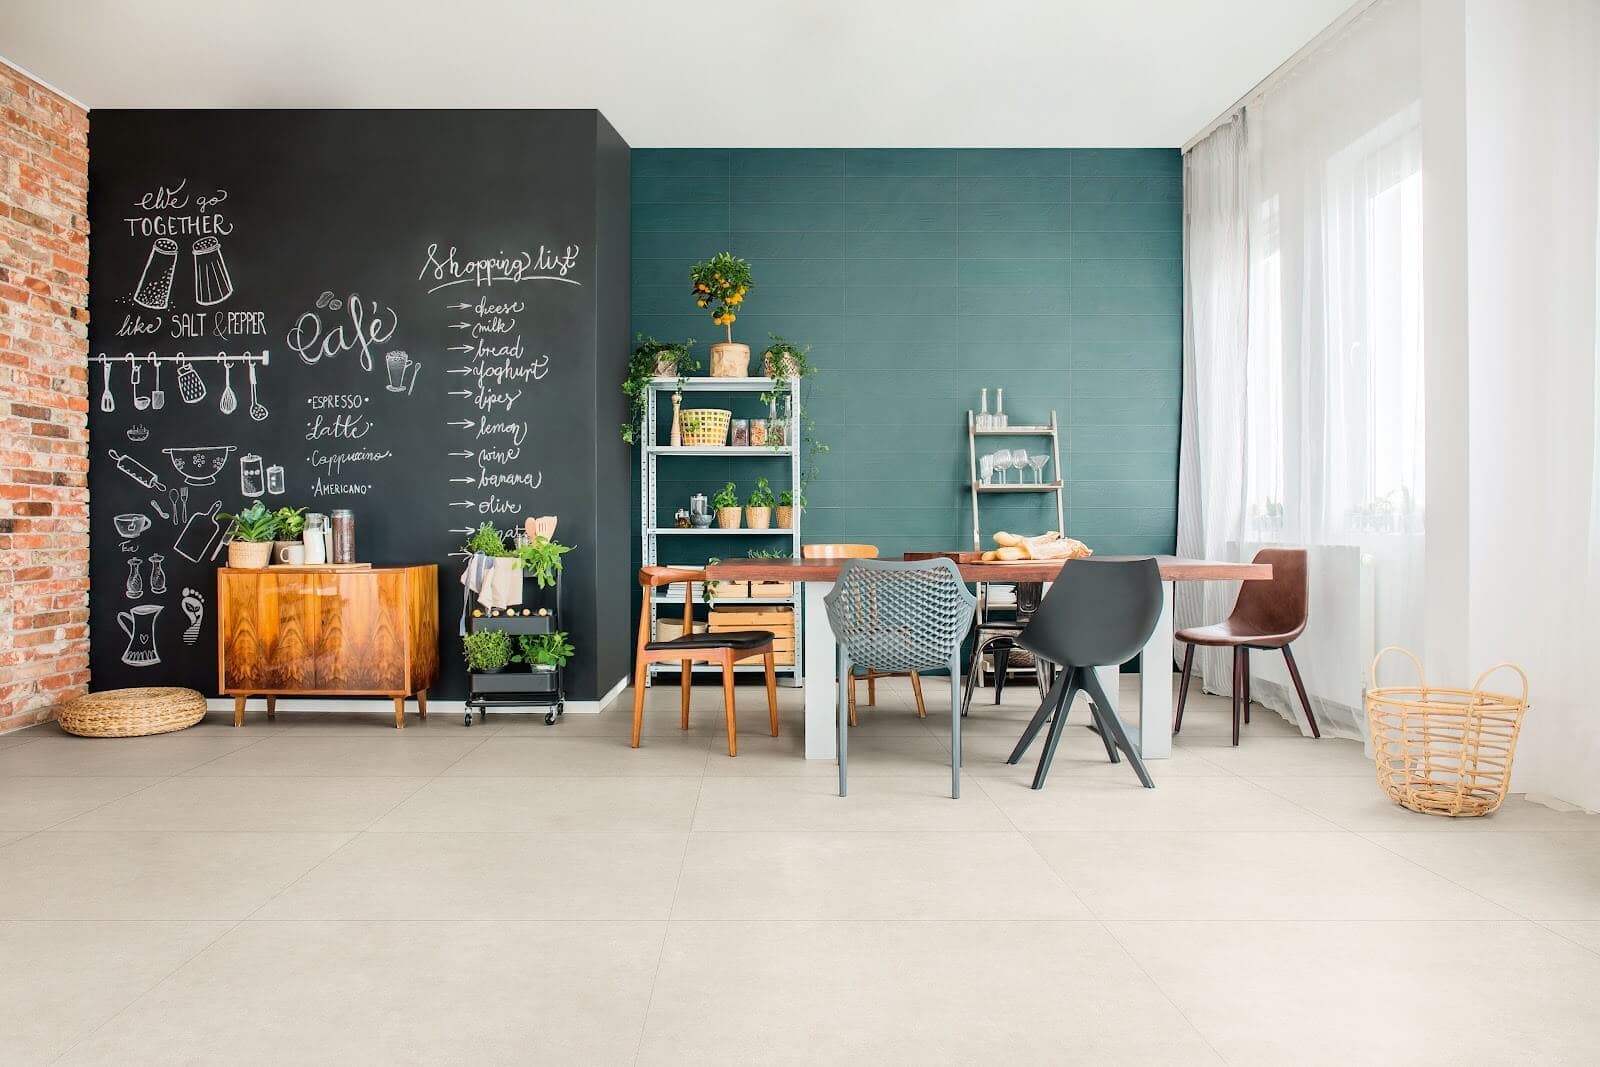 chill-look restaurant with ceramic tile flooring and green color wall tile